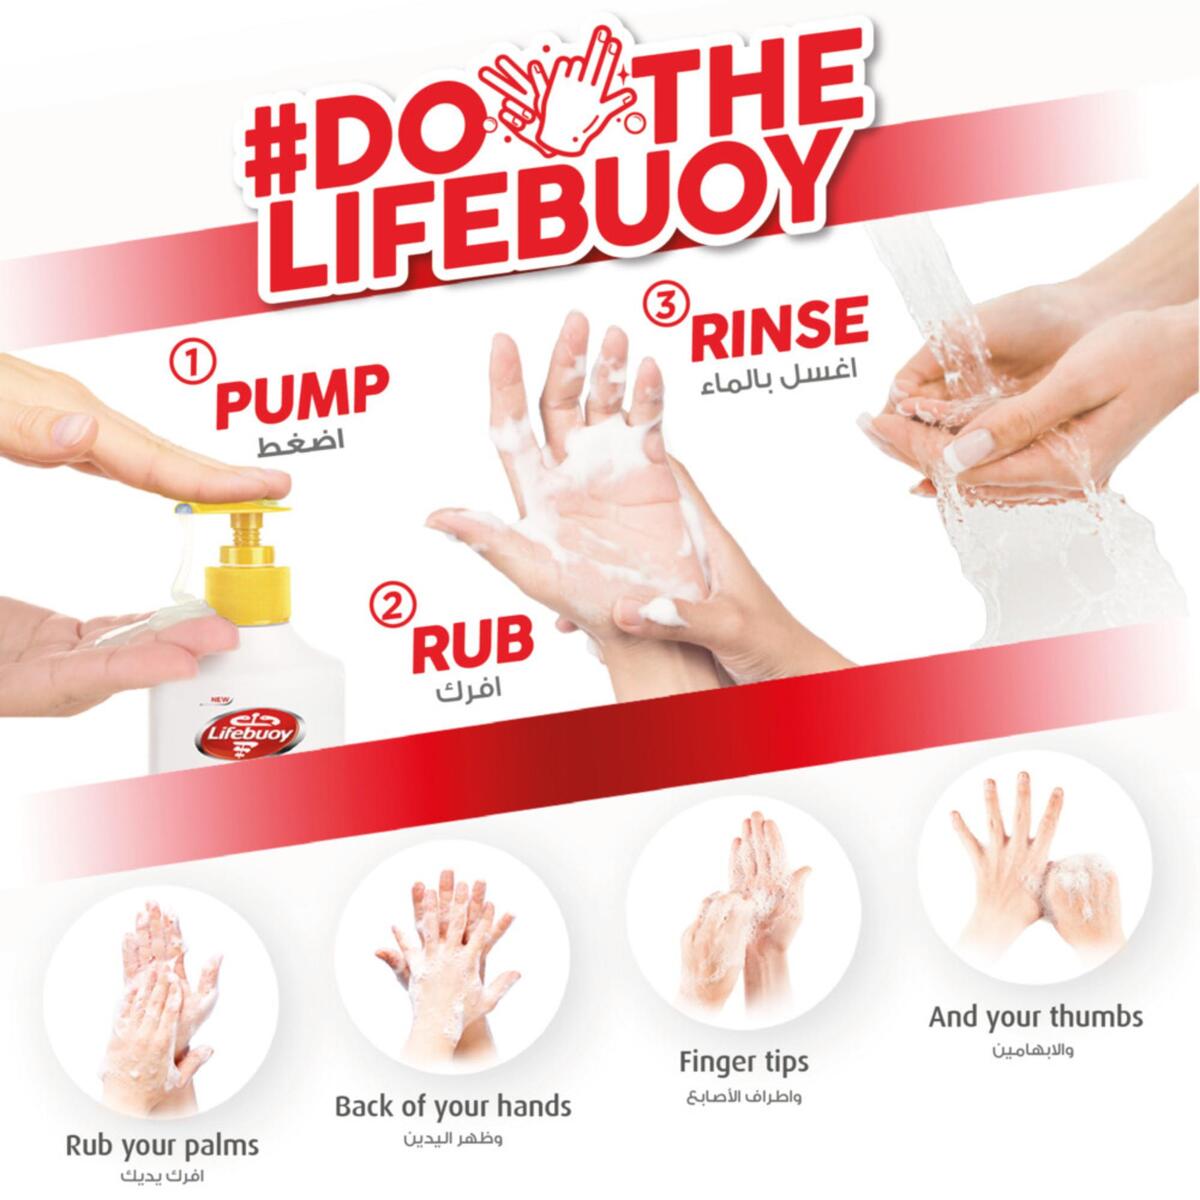 Lifebuoy Antibacterial Hand Wash, Lemon Fresh, For 100% Stronger Germ Protection & 10X Odour Removal, 200ml